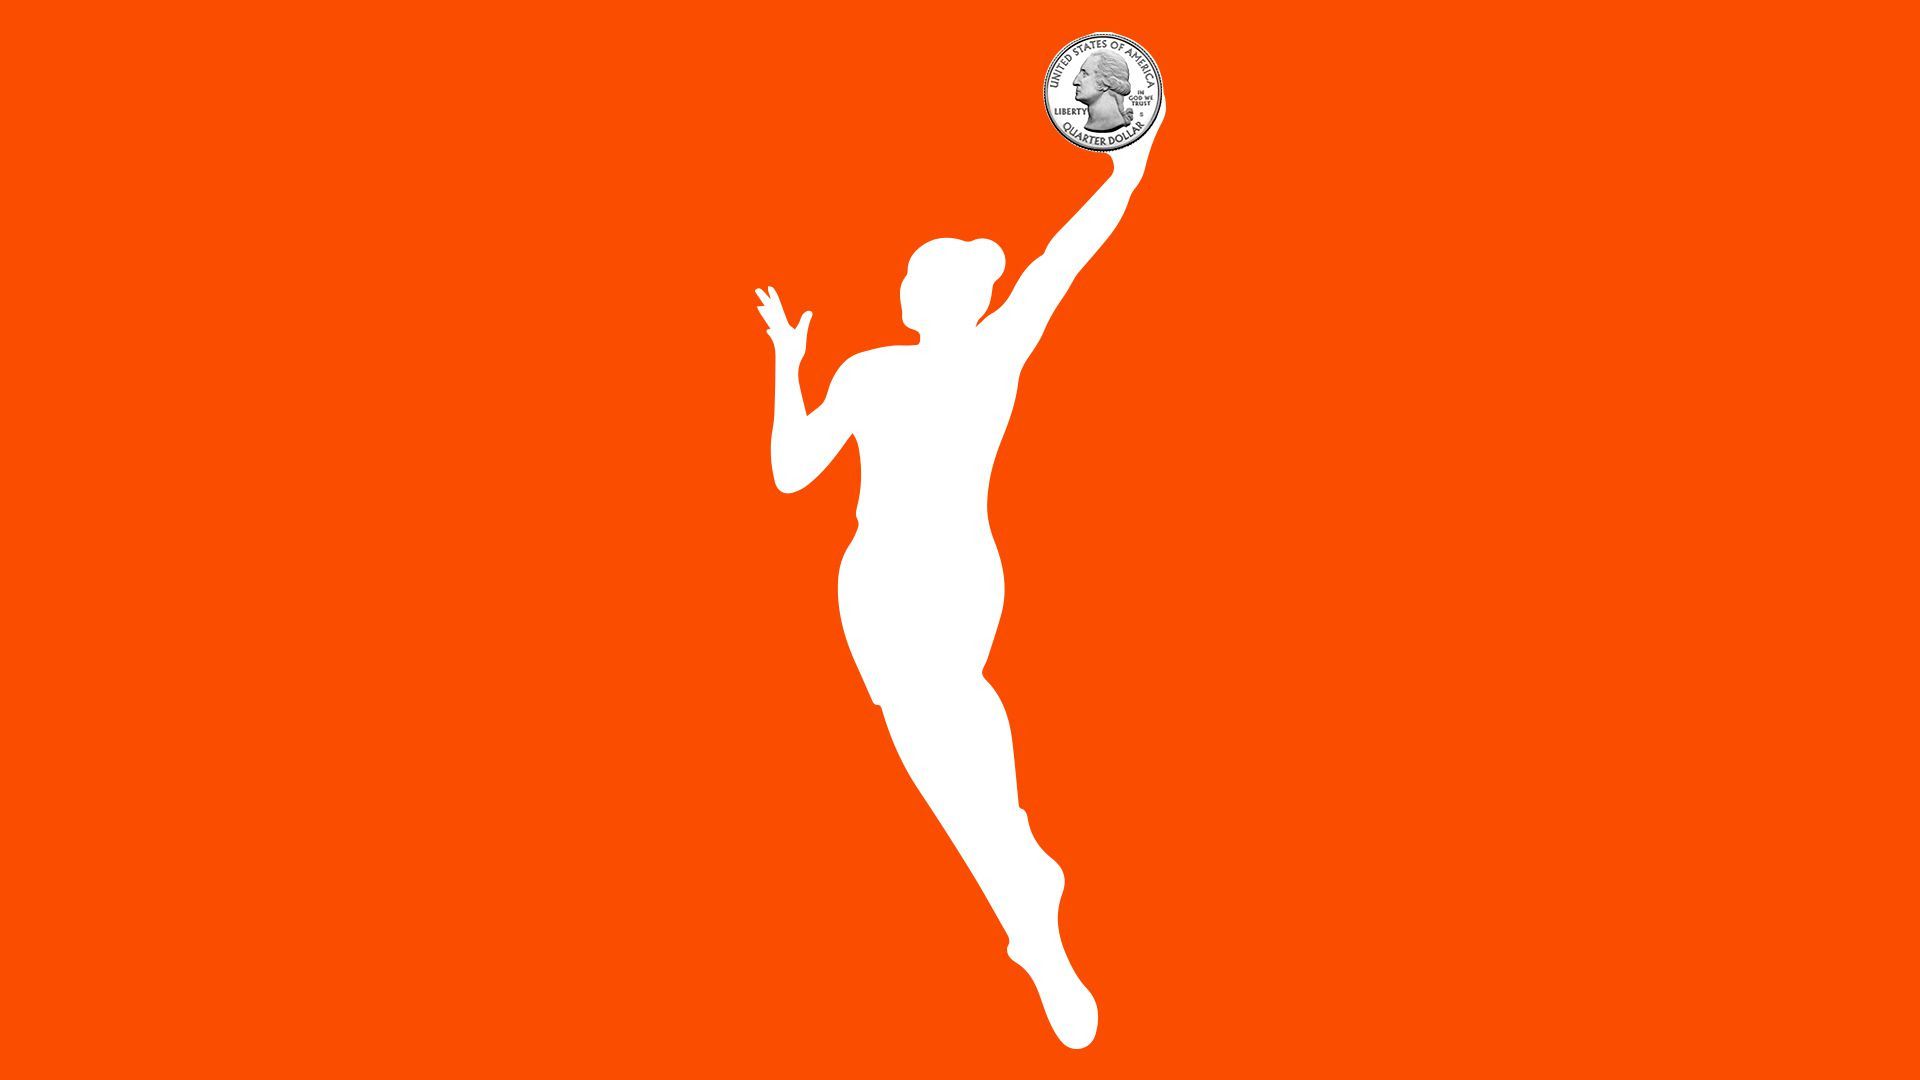 illustration of a woman basketball player dunking a quarter